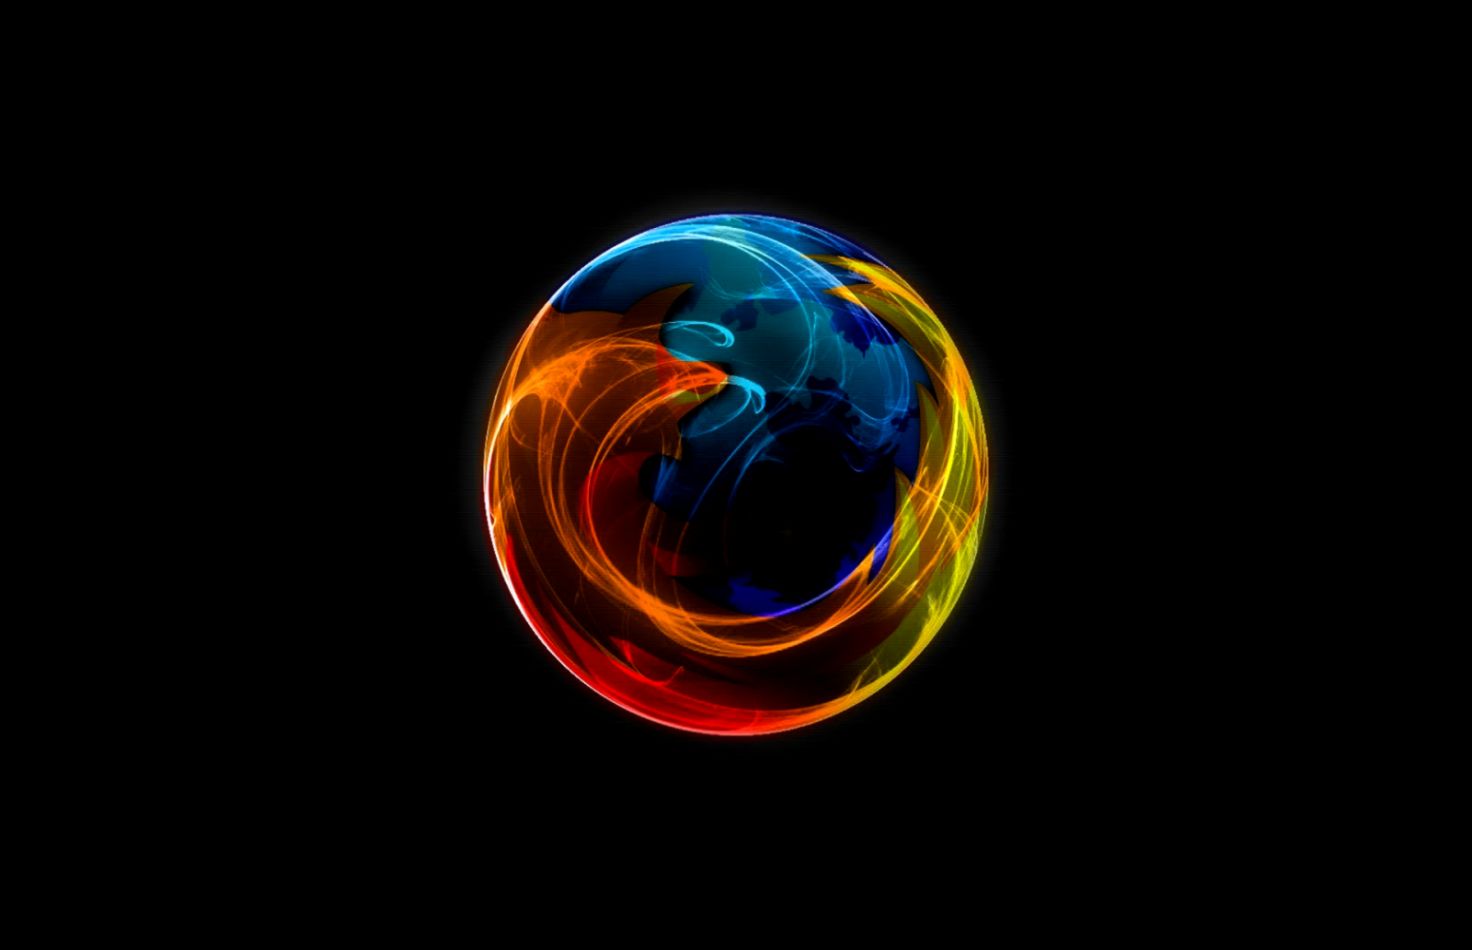 Mozilla Firefox Cool Logo Wallpapers Hd | High Definitions Wallpapers